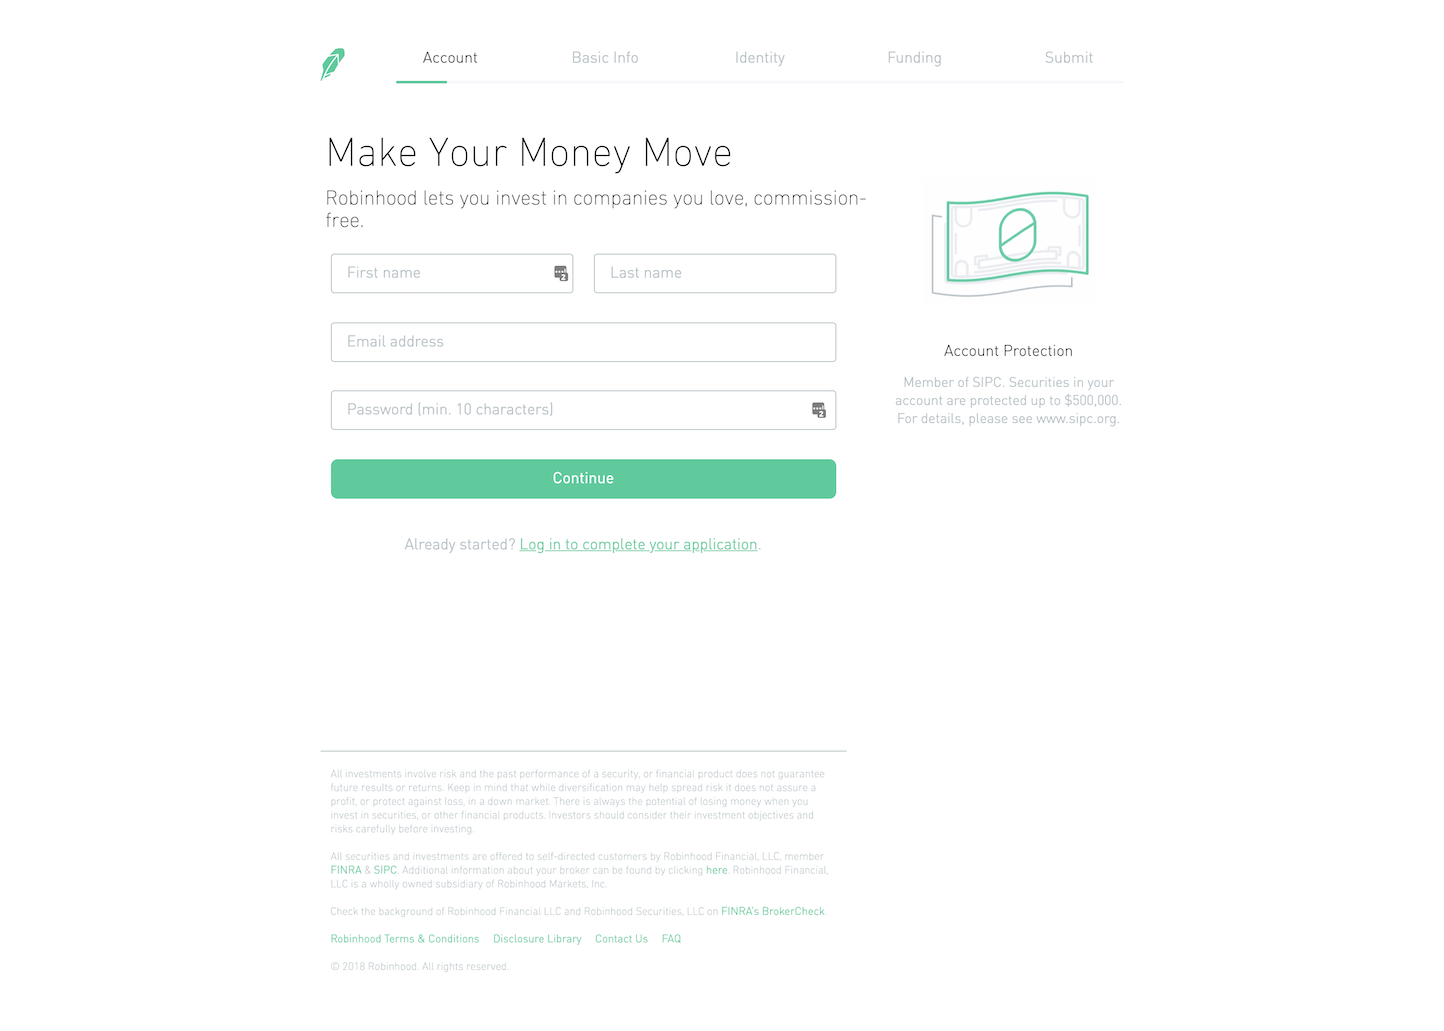 Screenshot of the Sign Up - Step 1 page from the Robinhood website.